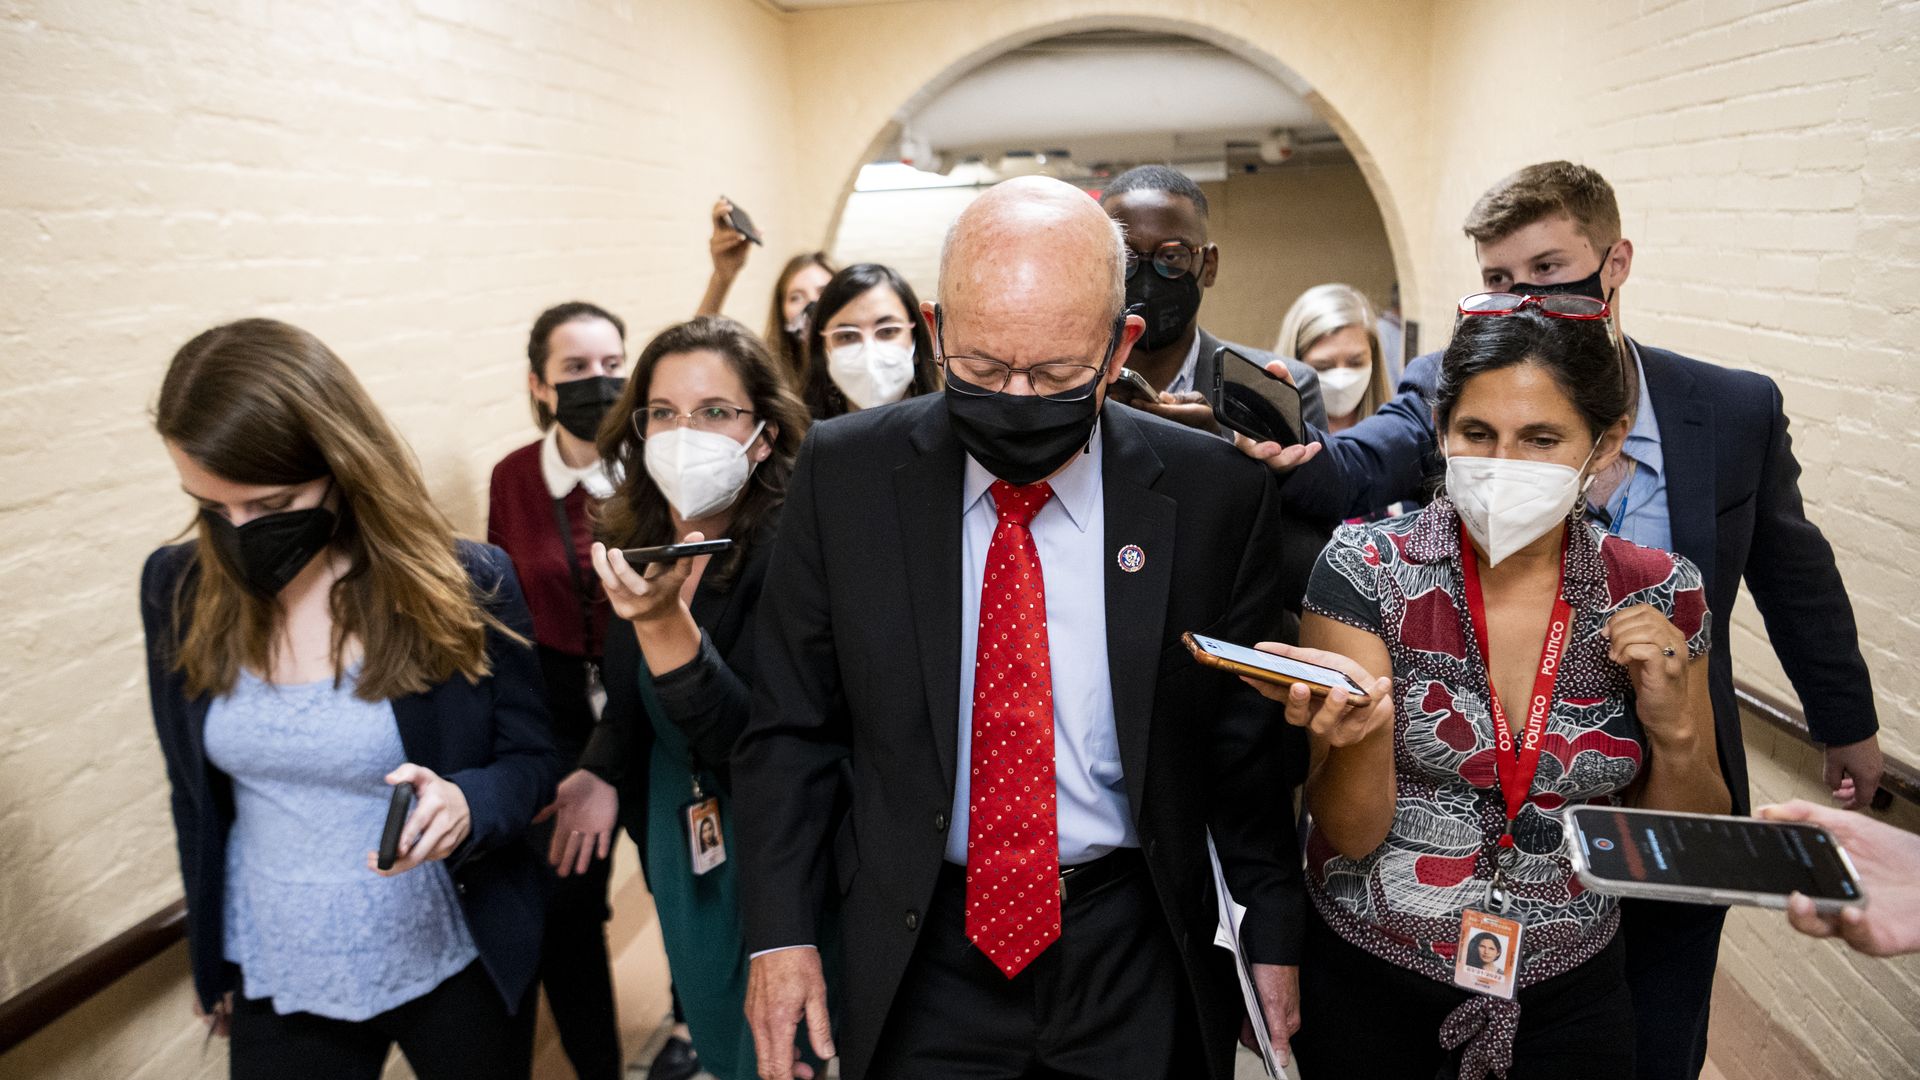 Rep. Peter DeFazio is seen surrounded by reporters following a meeting of the House Democratic Caucus on Monday.